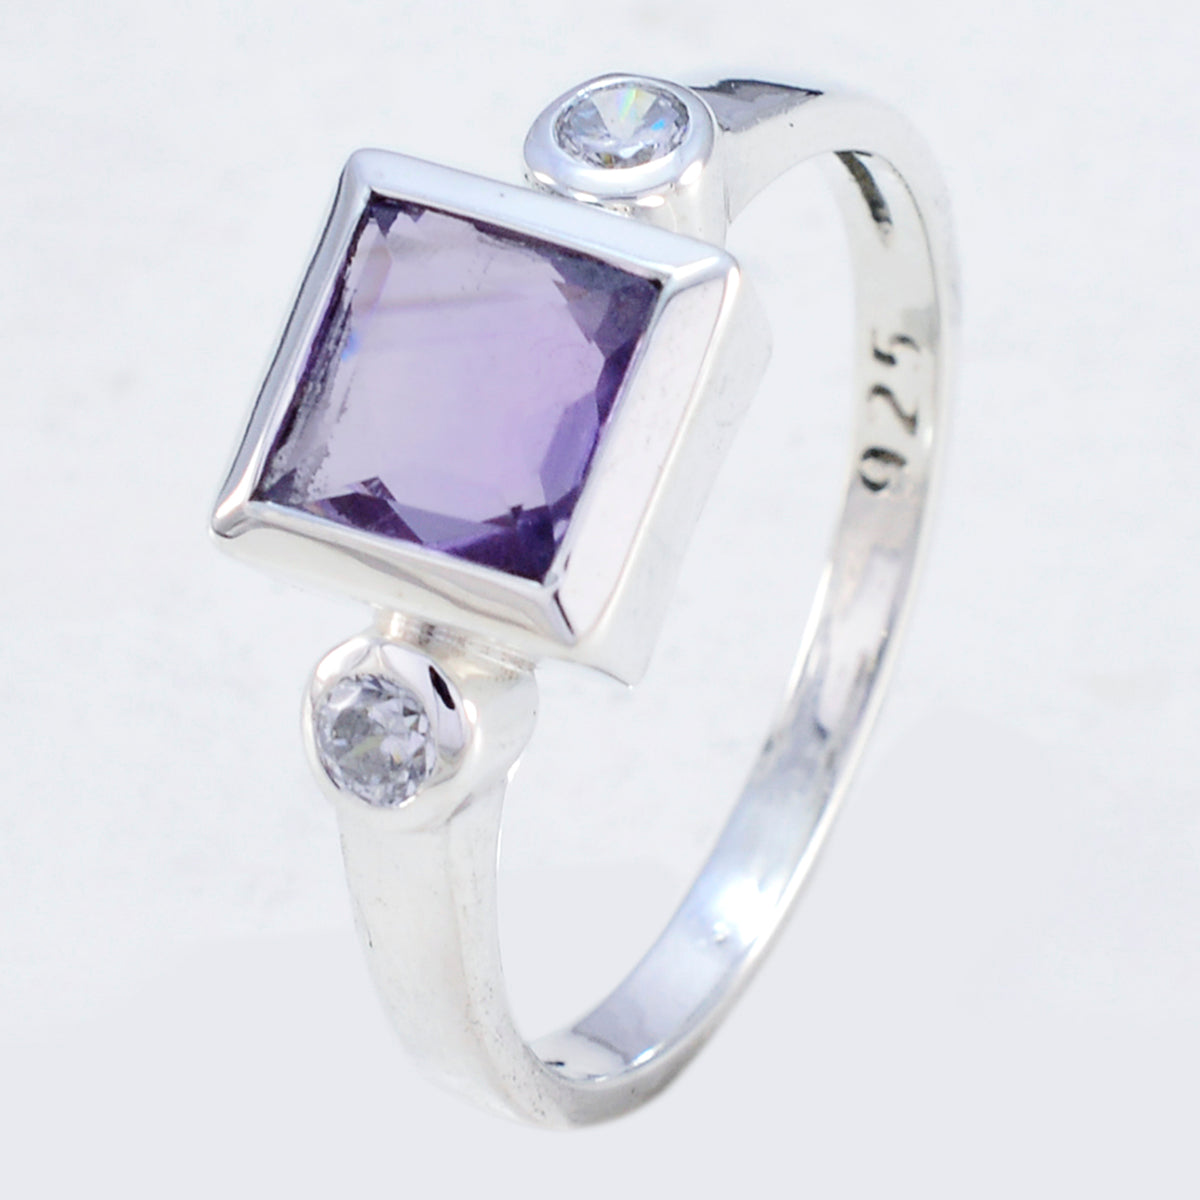 Classy Gemstones Amethyst 925 Silver Ring Famous Jewelry Designers